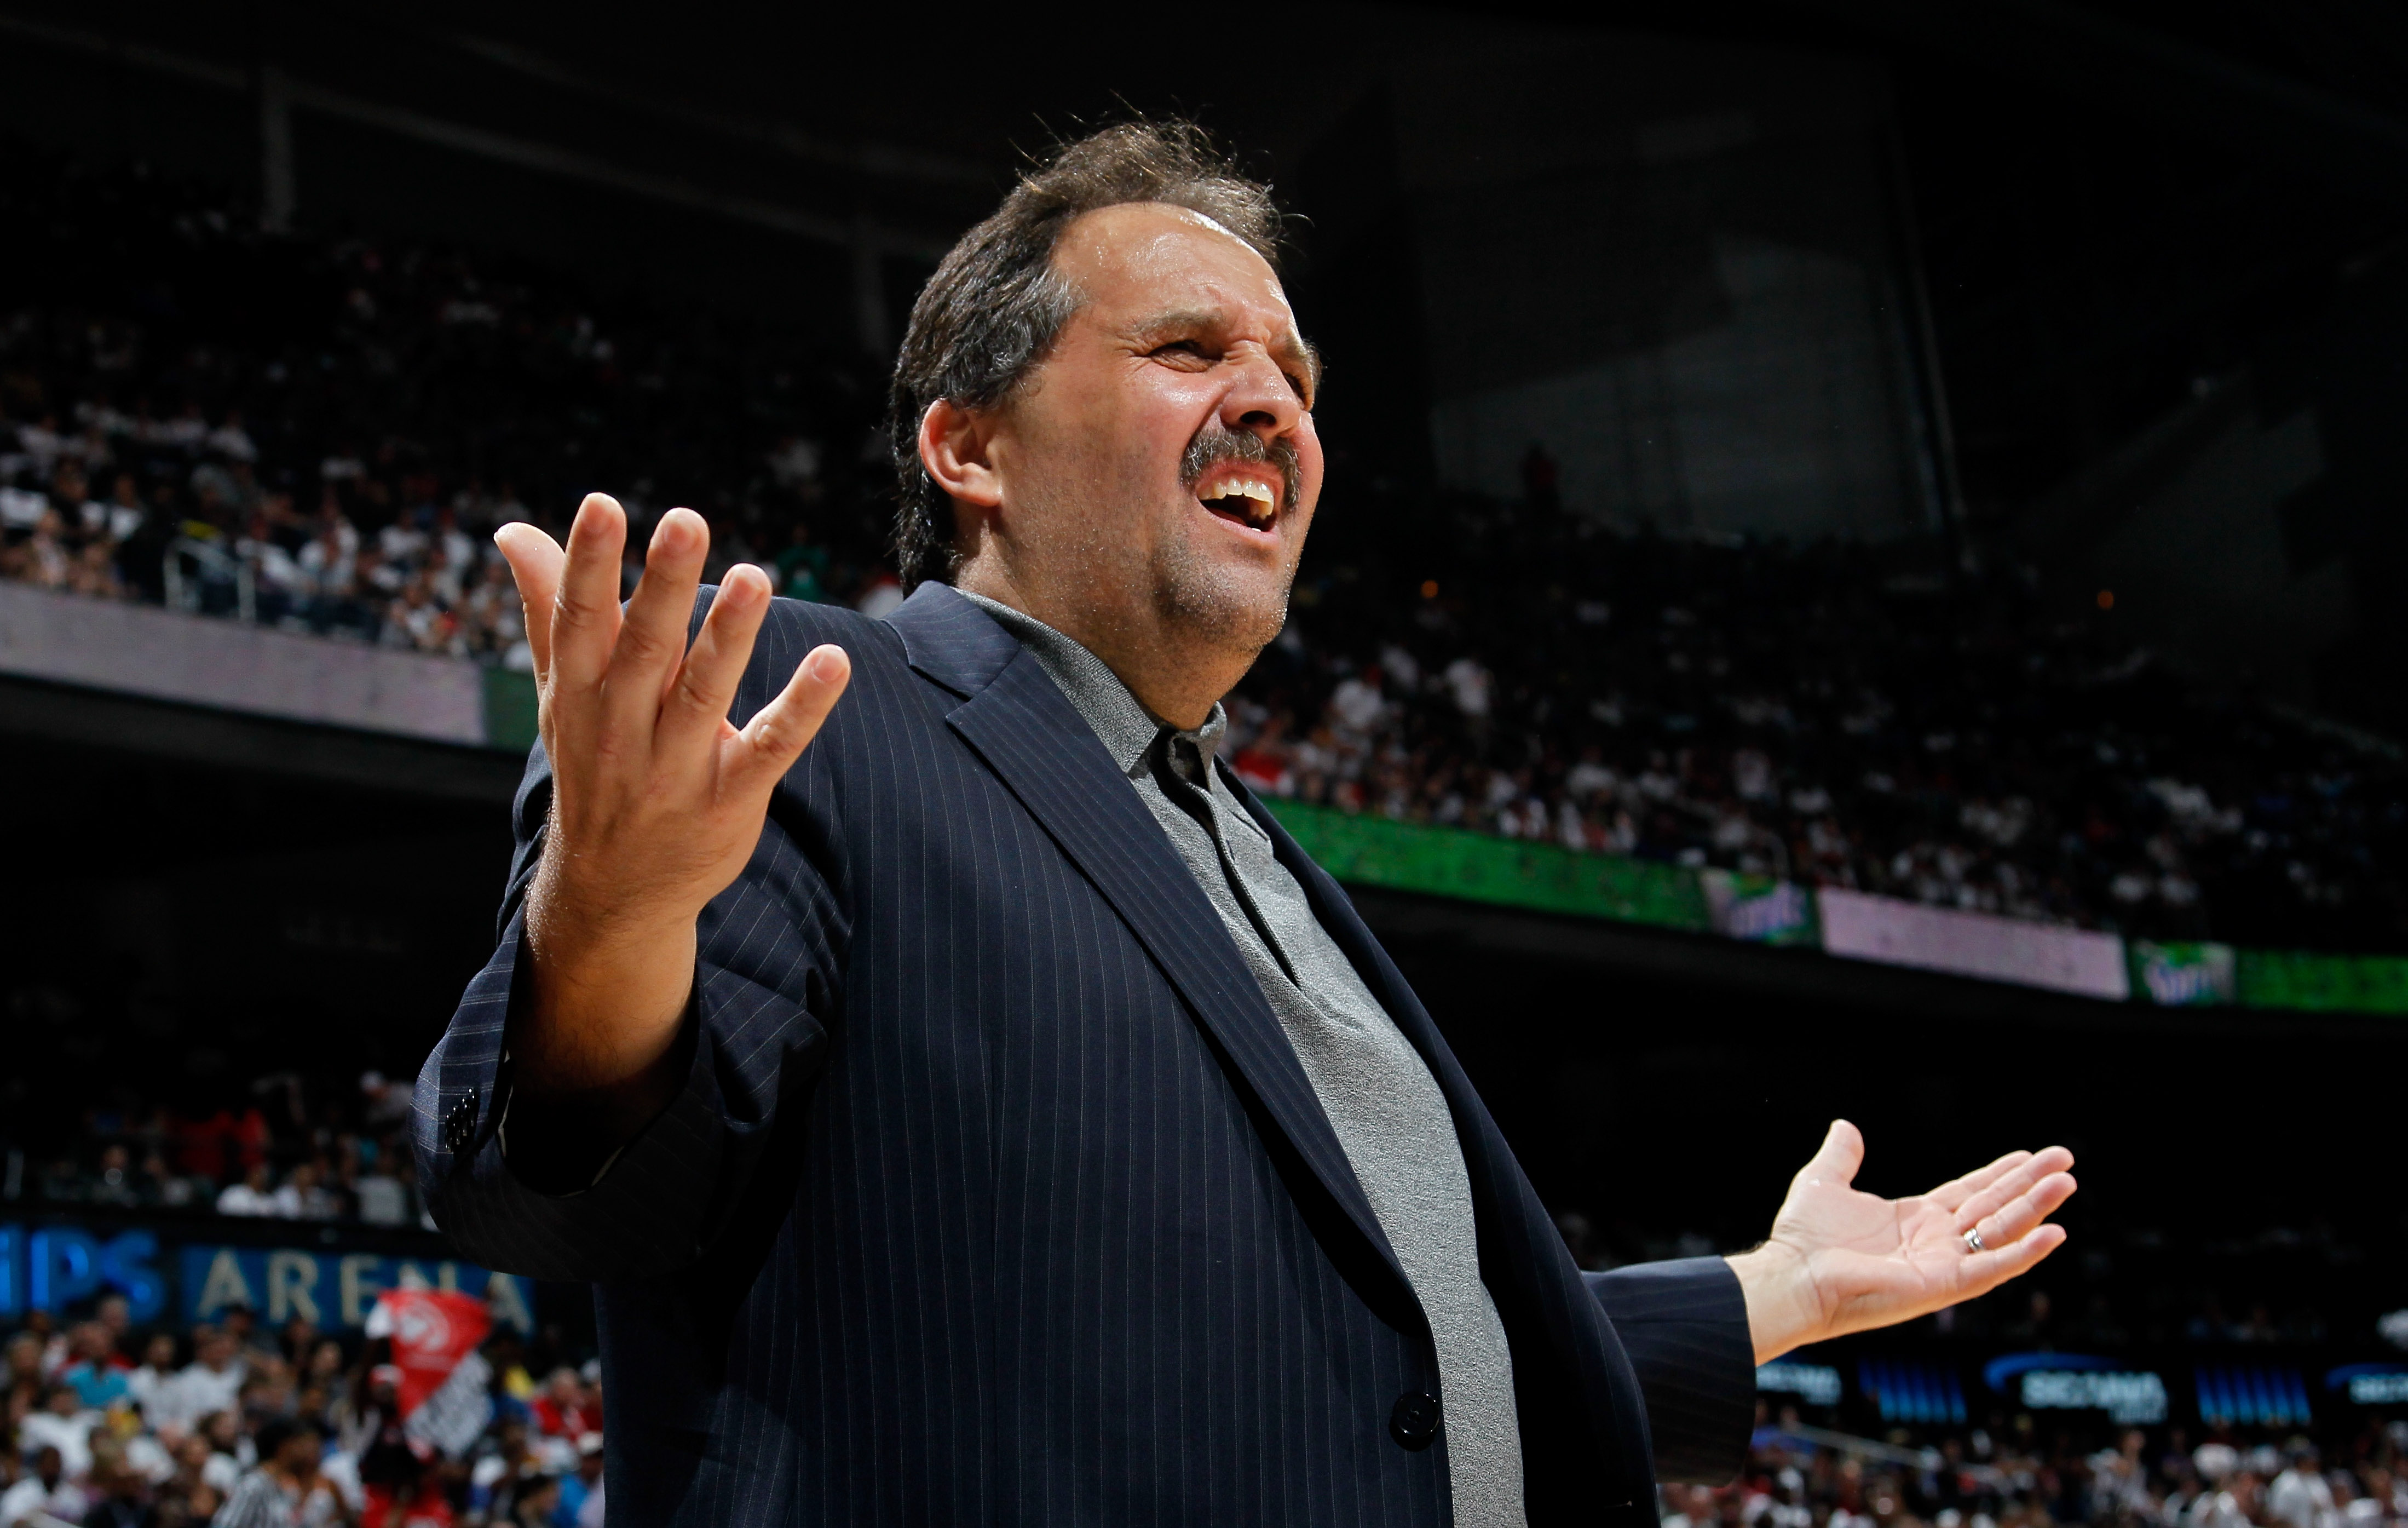 ATLANTA, GA - APRIL 28:  Stan Van Gundy of the Orlando Magic questions a call by the official during Game Six of the Eastern Conference Quarterfinals in the 2011 NBA Playoffs against the Atlanta Hawks at Philips Arena on April 28, 2011 in Atlanta, Georgia